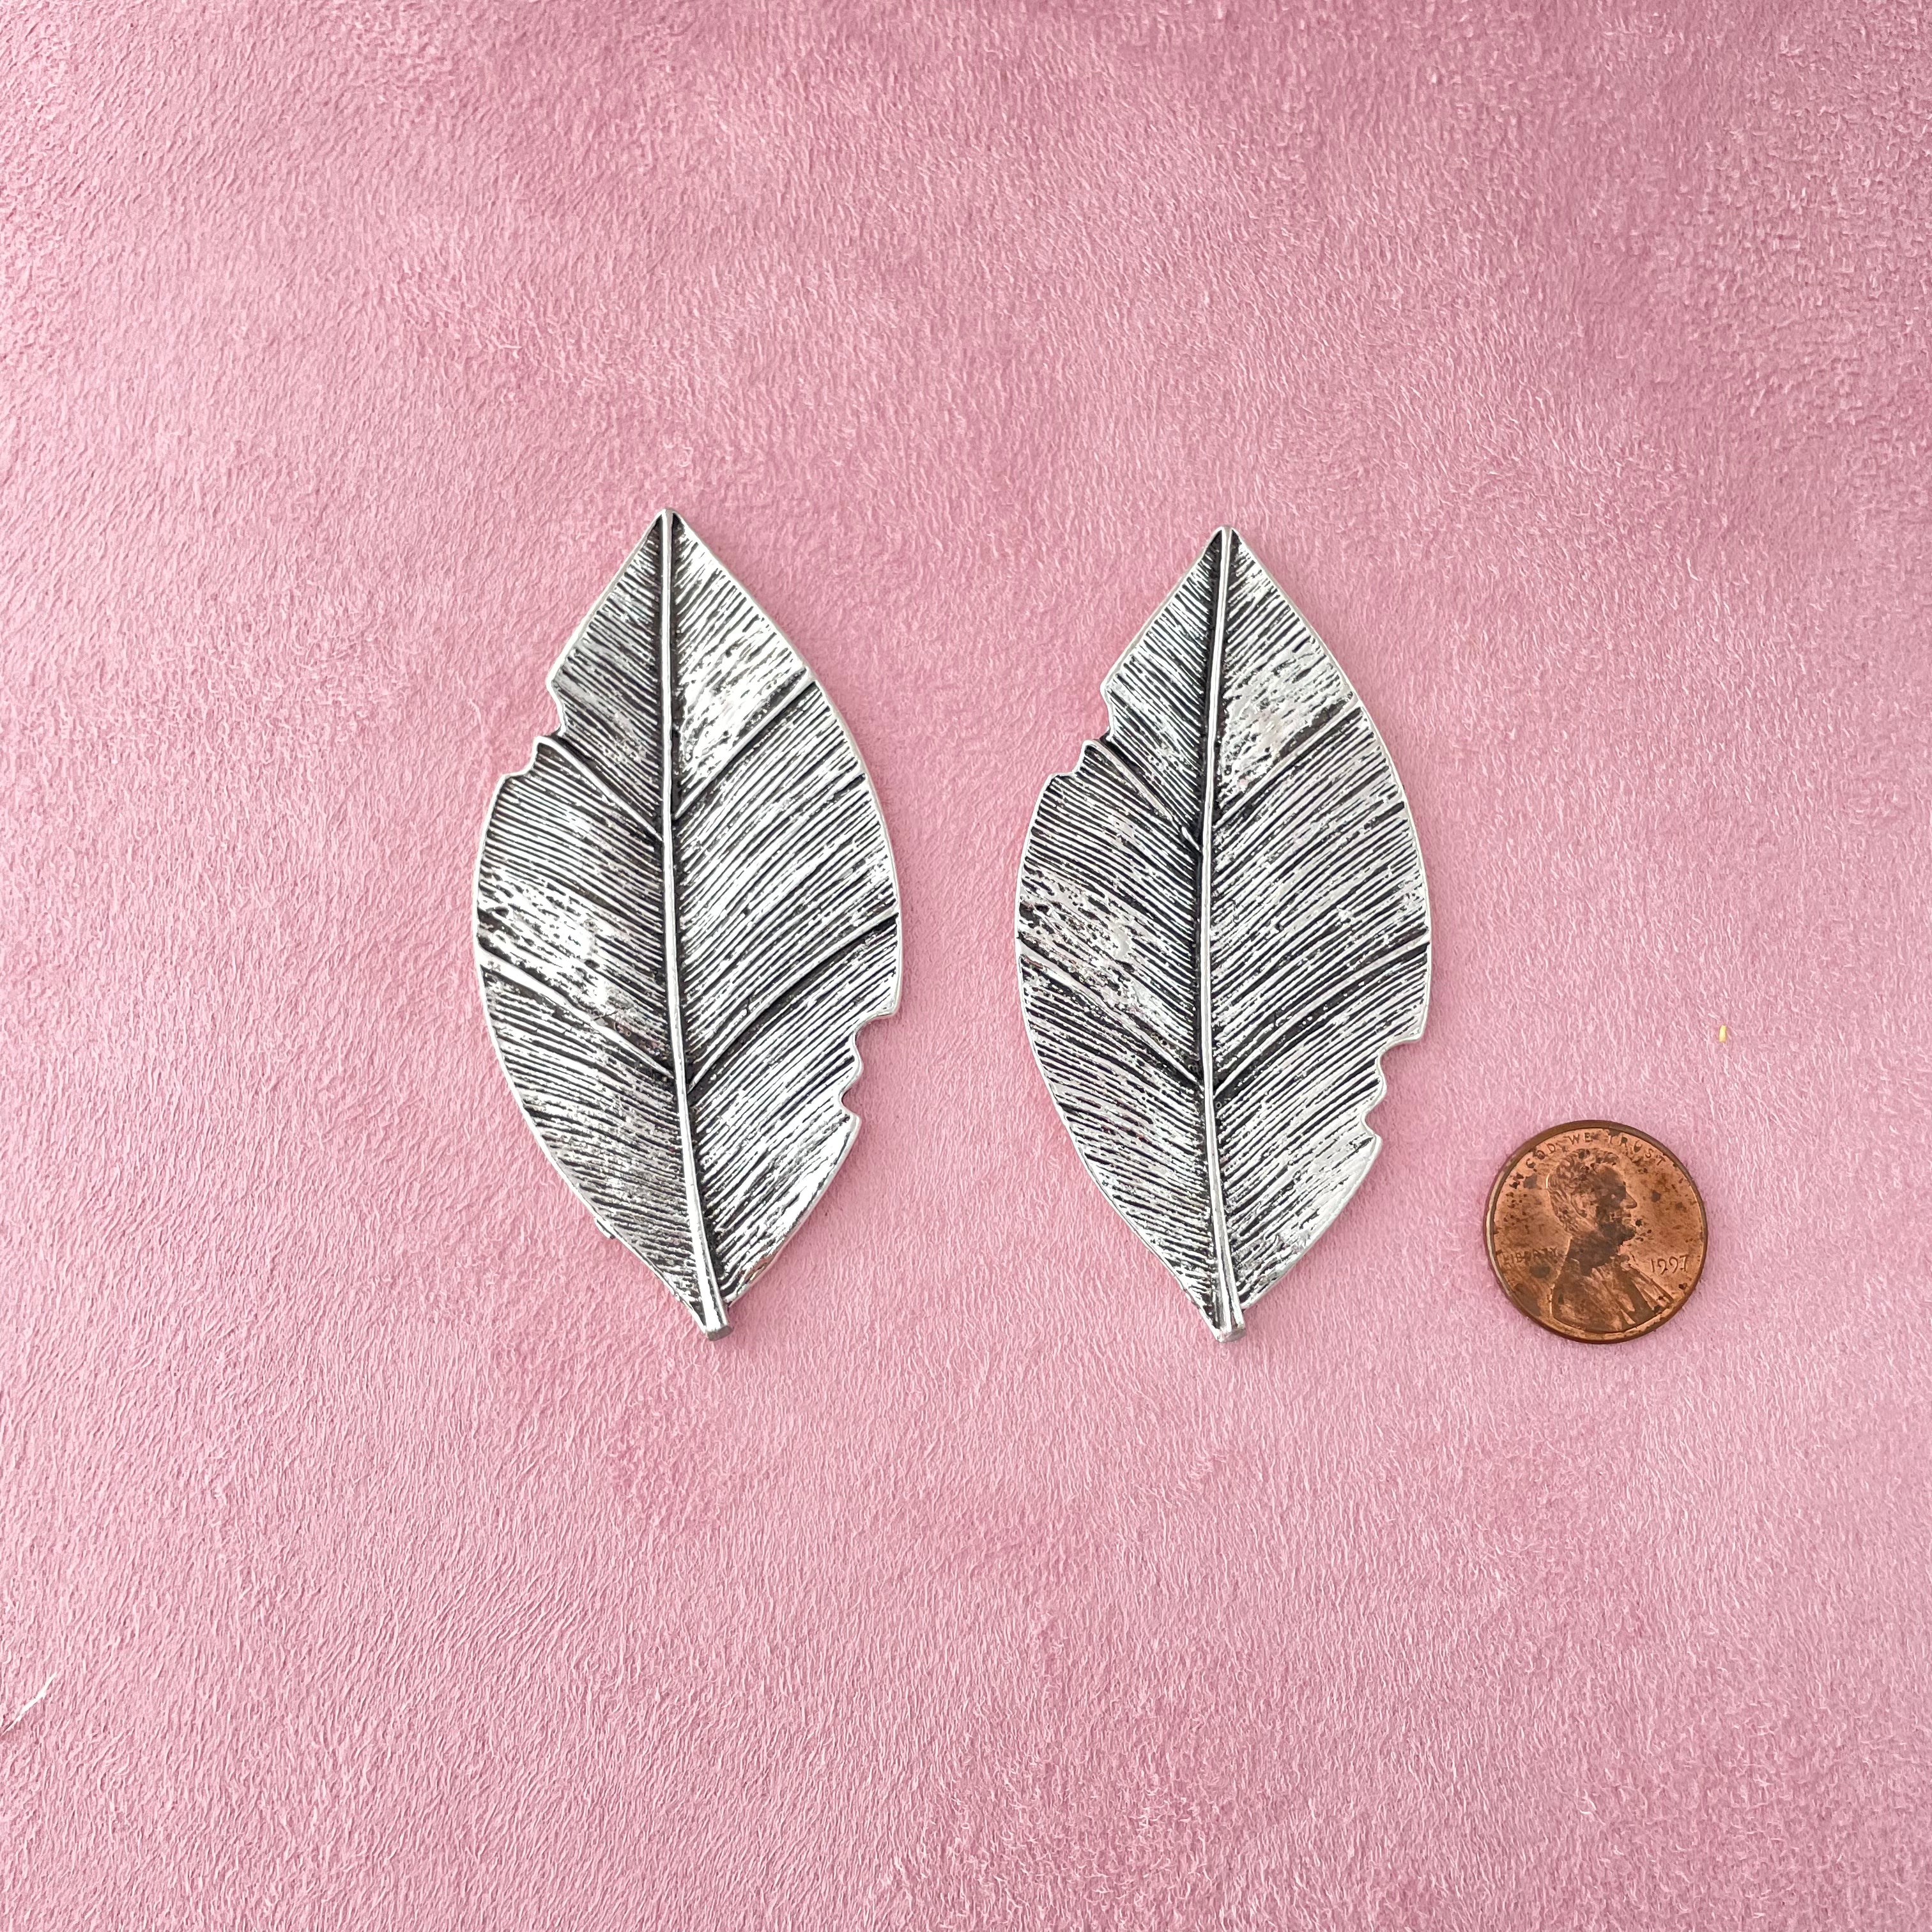 2 large silver with dark accent leaves with penny beside for size reference - wedding flat lay props from Champagne & GRIT